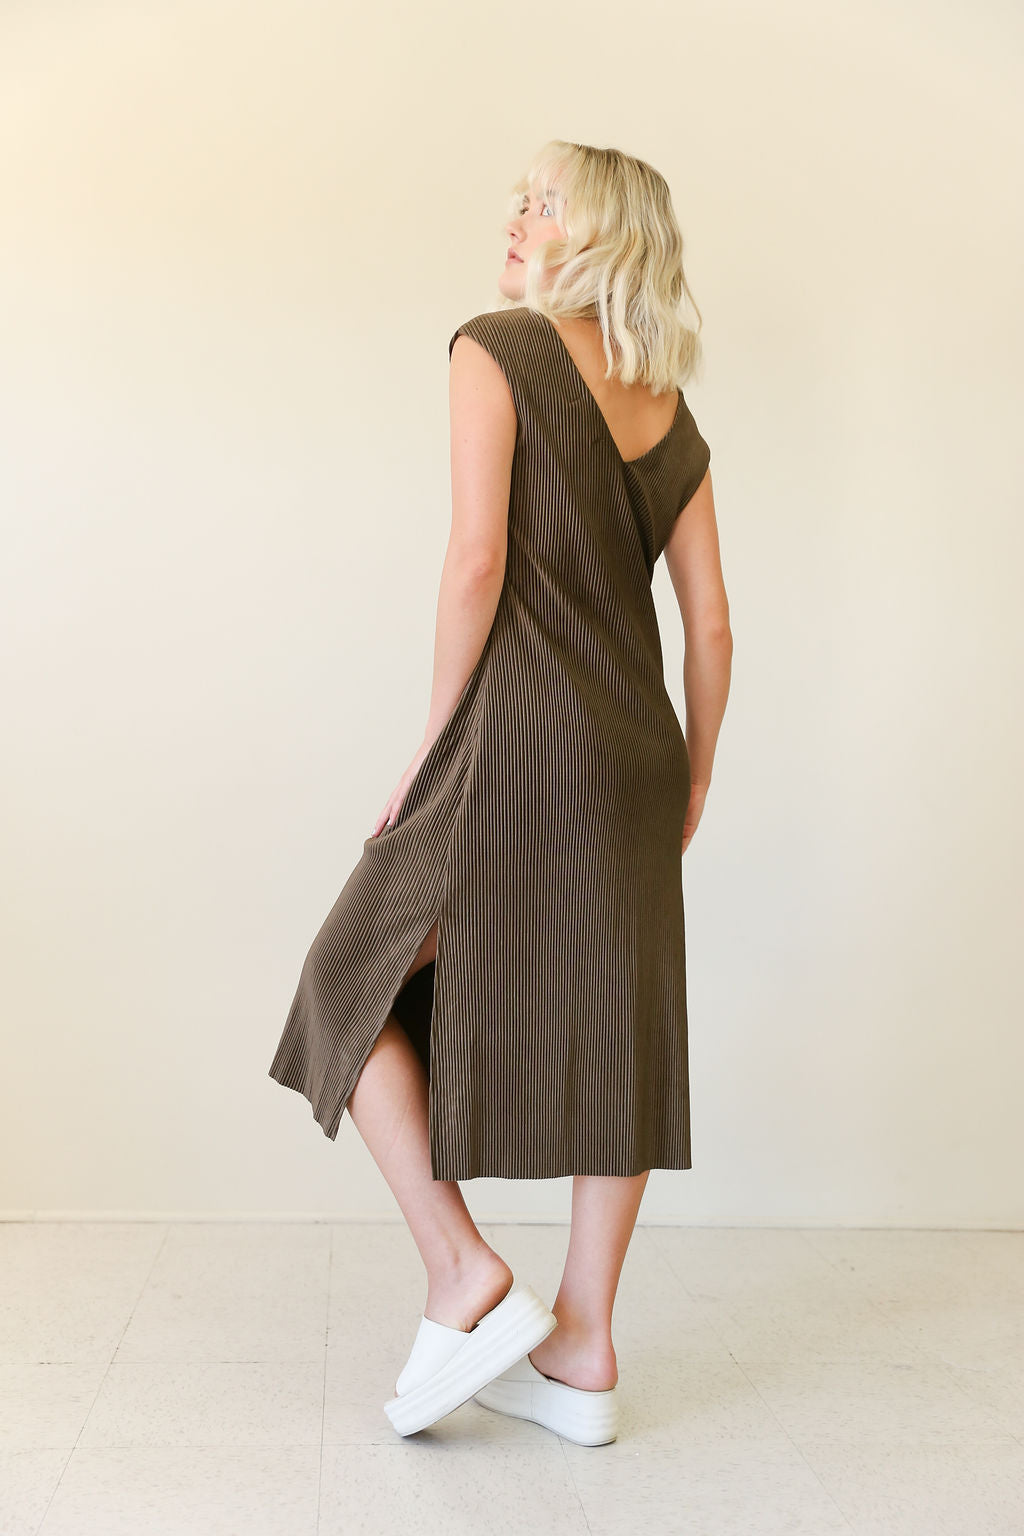 The Bittersweet Sleeveless Midi Dress by For Good